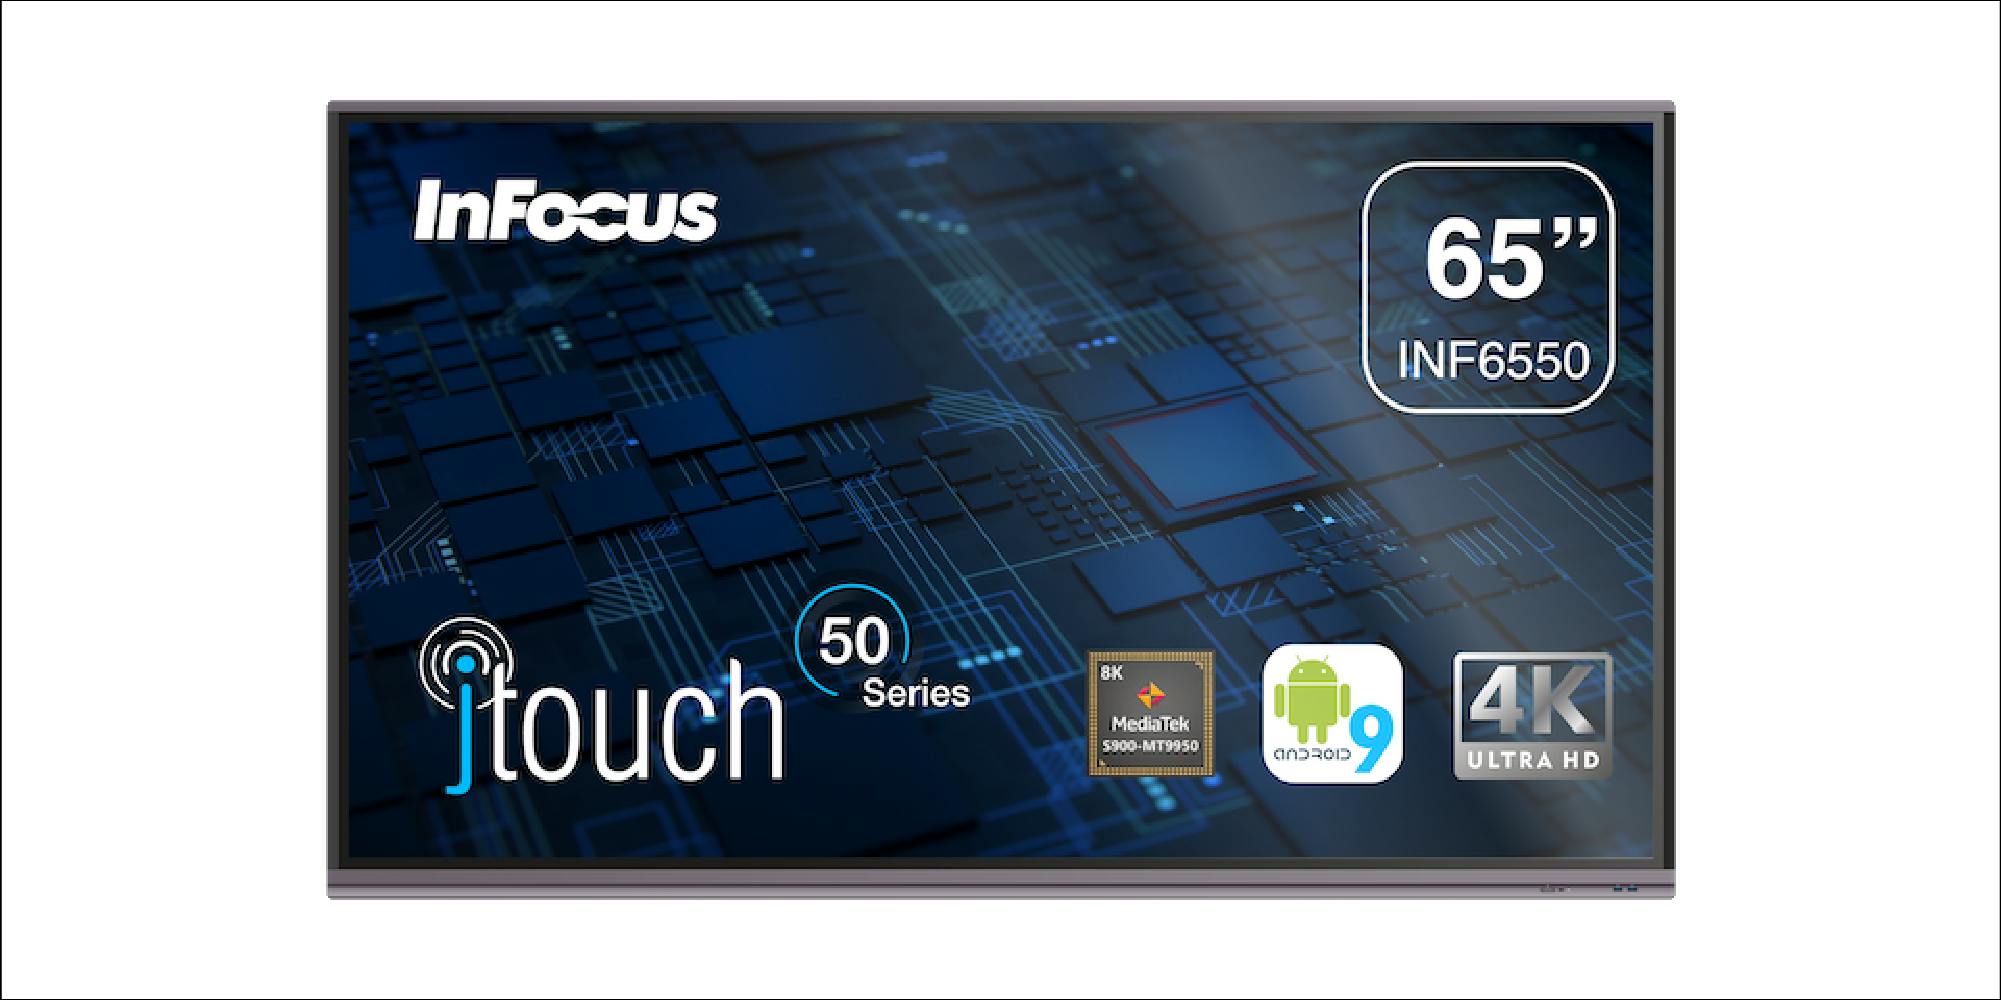 JTouch Series 50 - INF6550